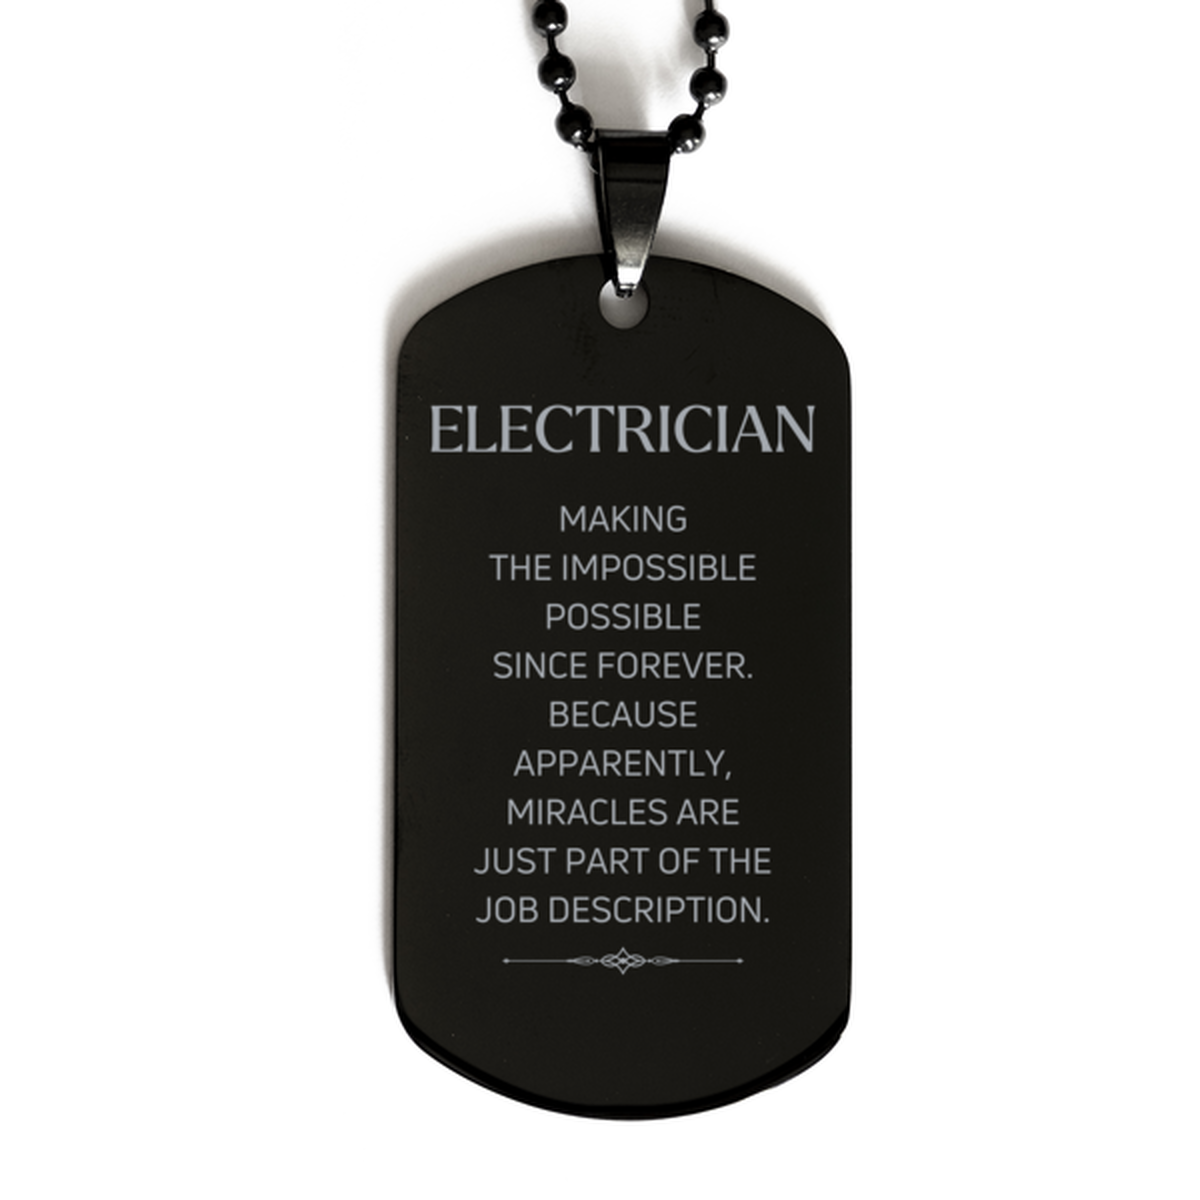 Funny Electrician Gifts, Miracles are just part of the job description, Inspirational Birthday Black Dog Tag For Electrician, Men, Women, Coworkers, Friends, Boss